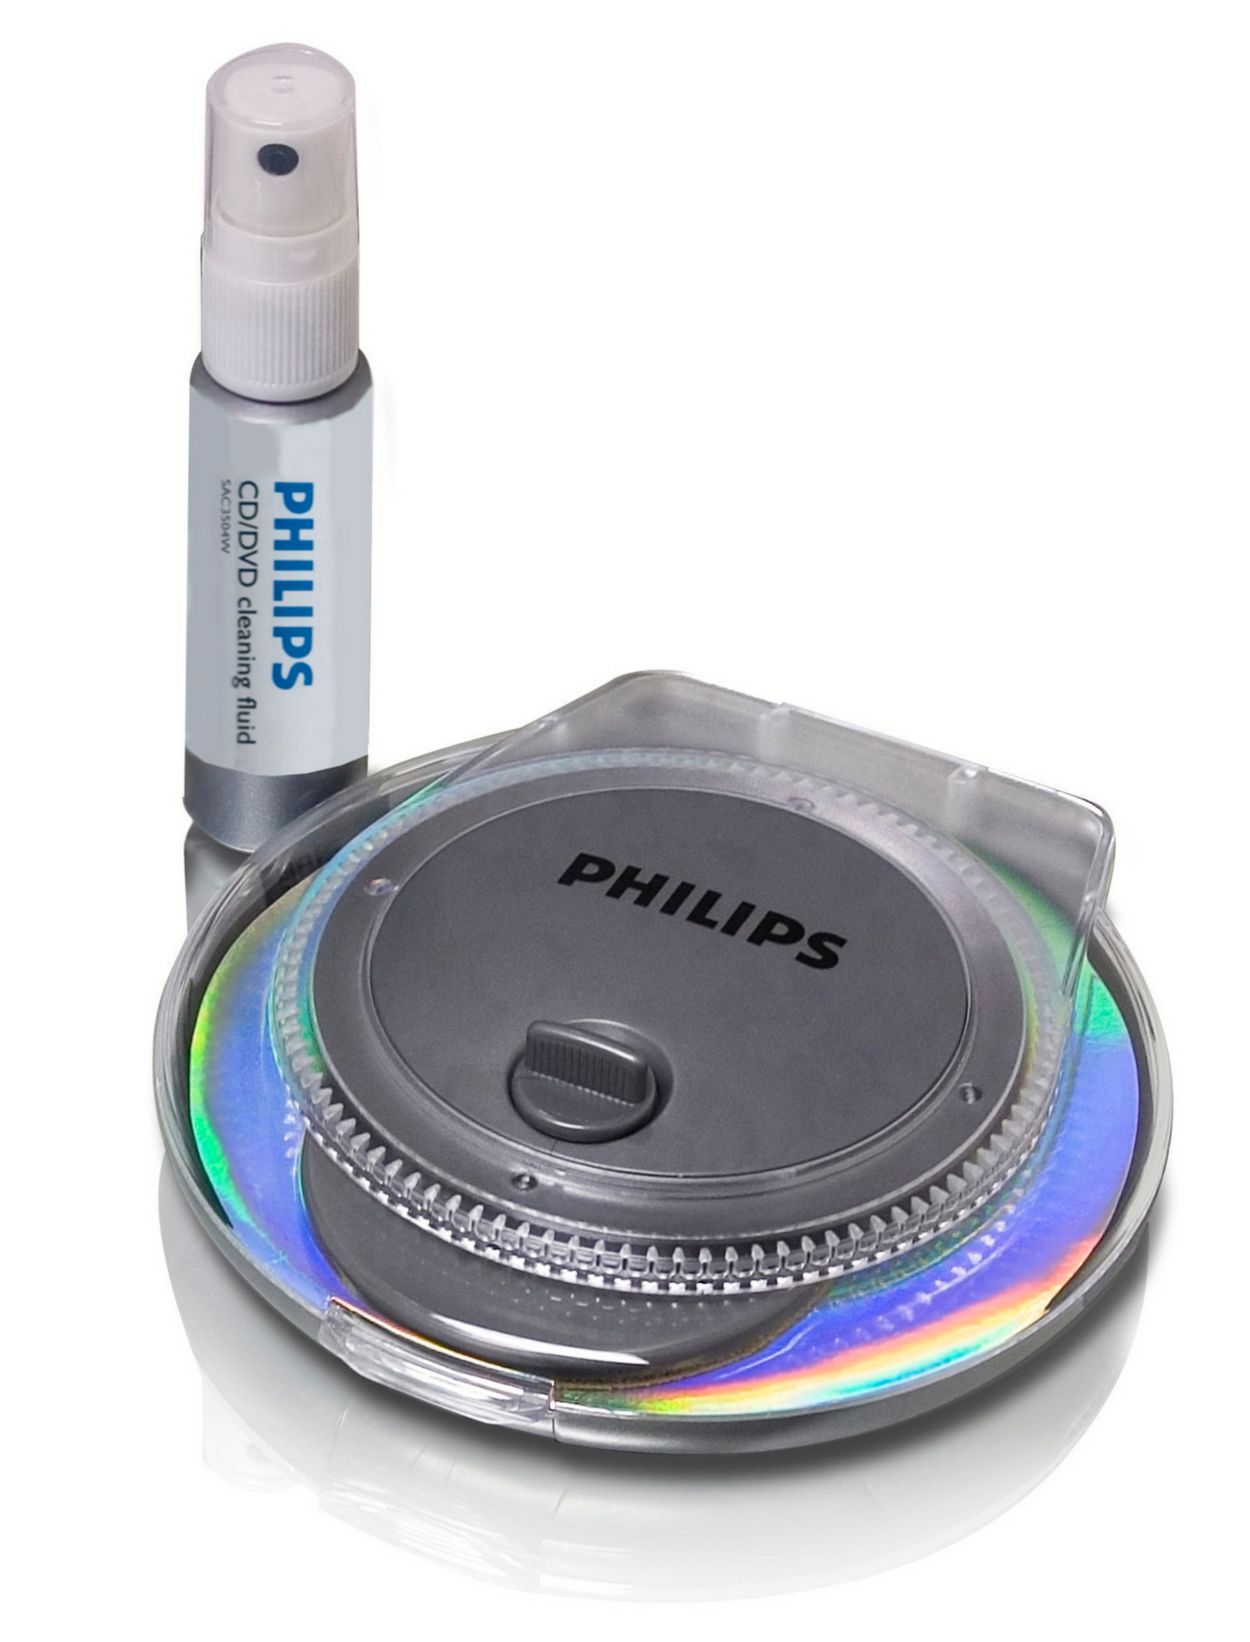 DVD CD Repair Kit with Cleaning Solution Included - Hand Powered